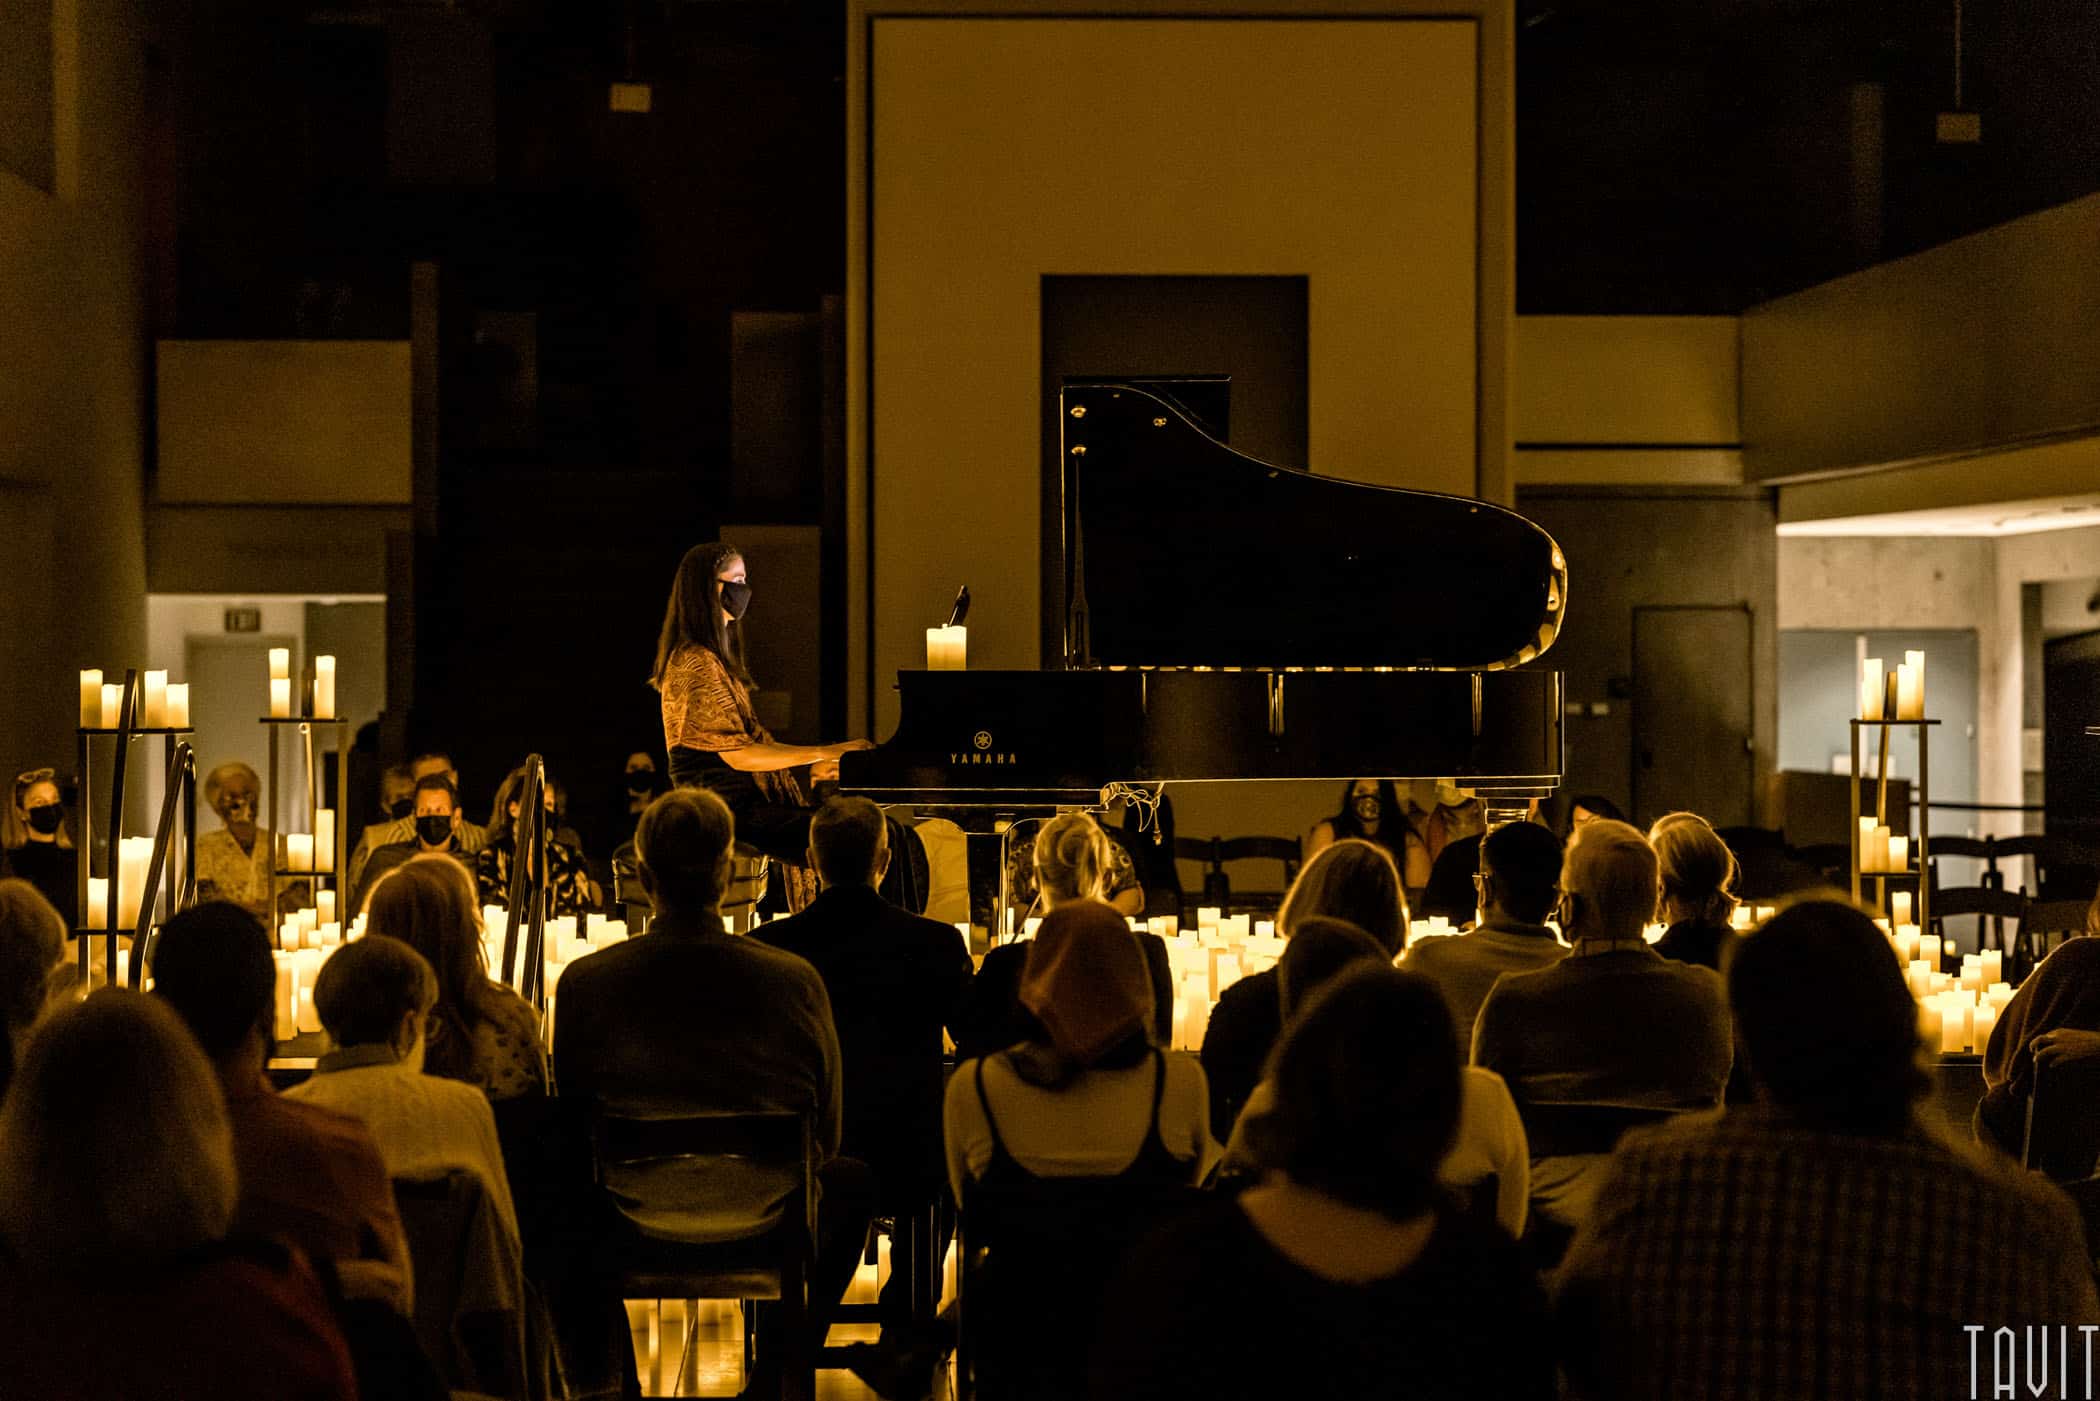 Pianist playing on stage with candles and audience